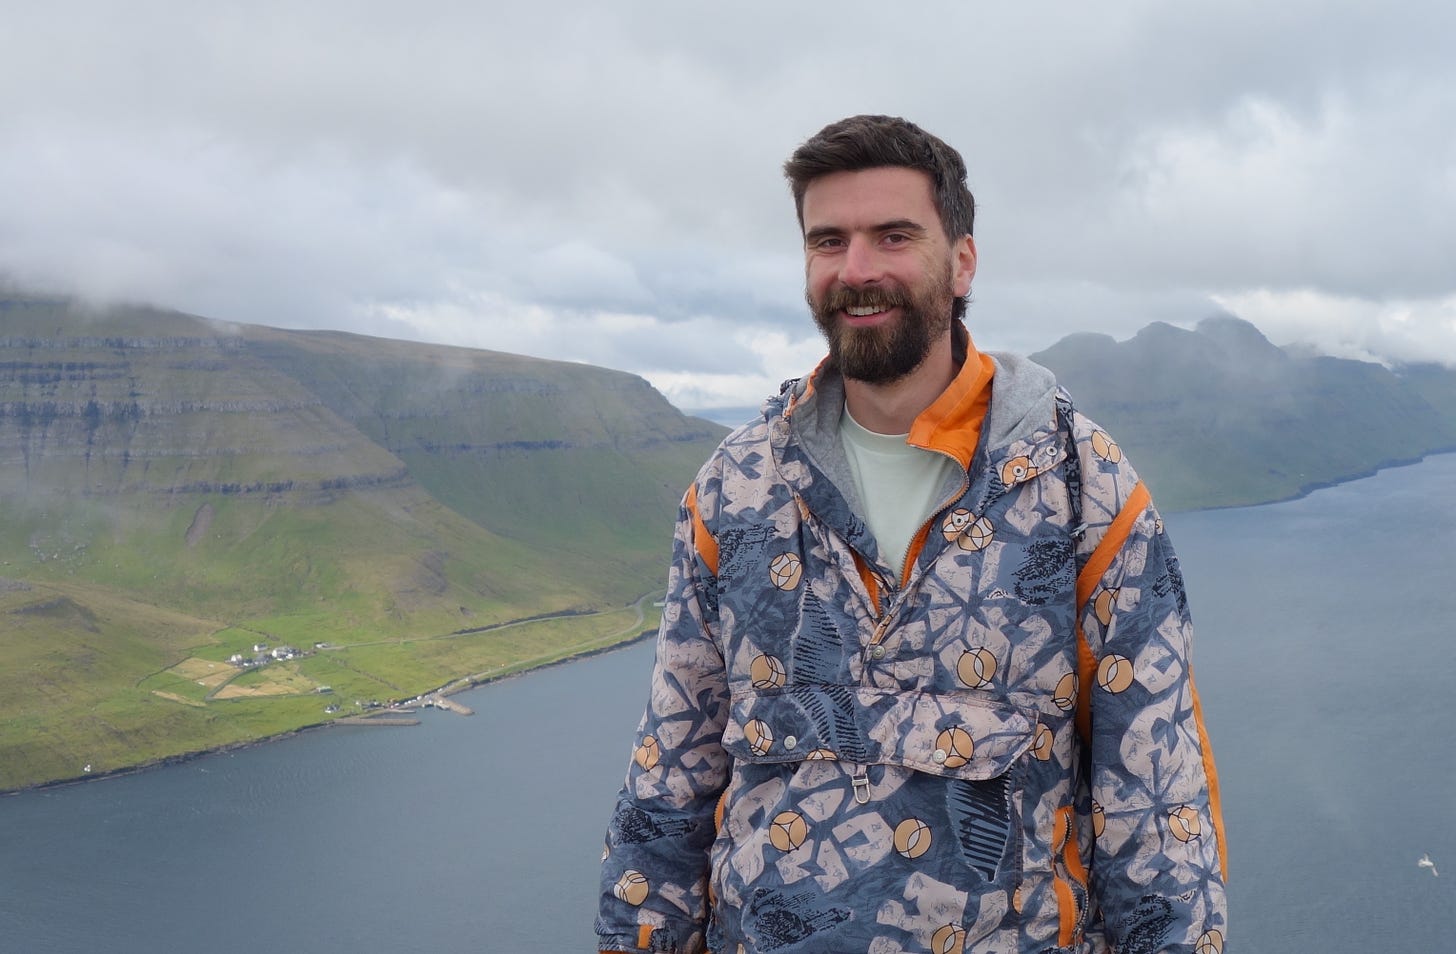 Zac Crellin, creator of Open Newswire stands smiling in front of a natural landscape.